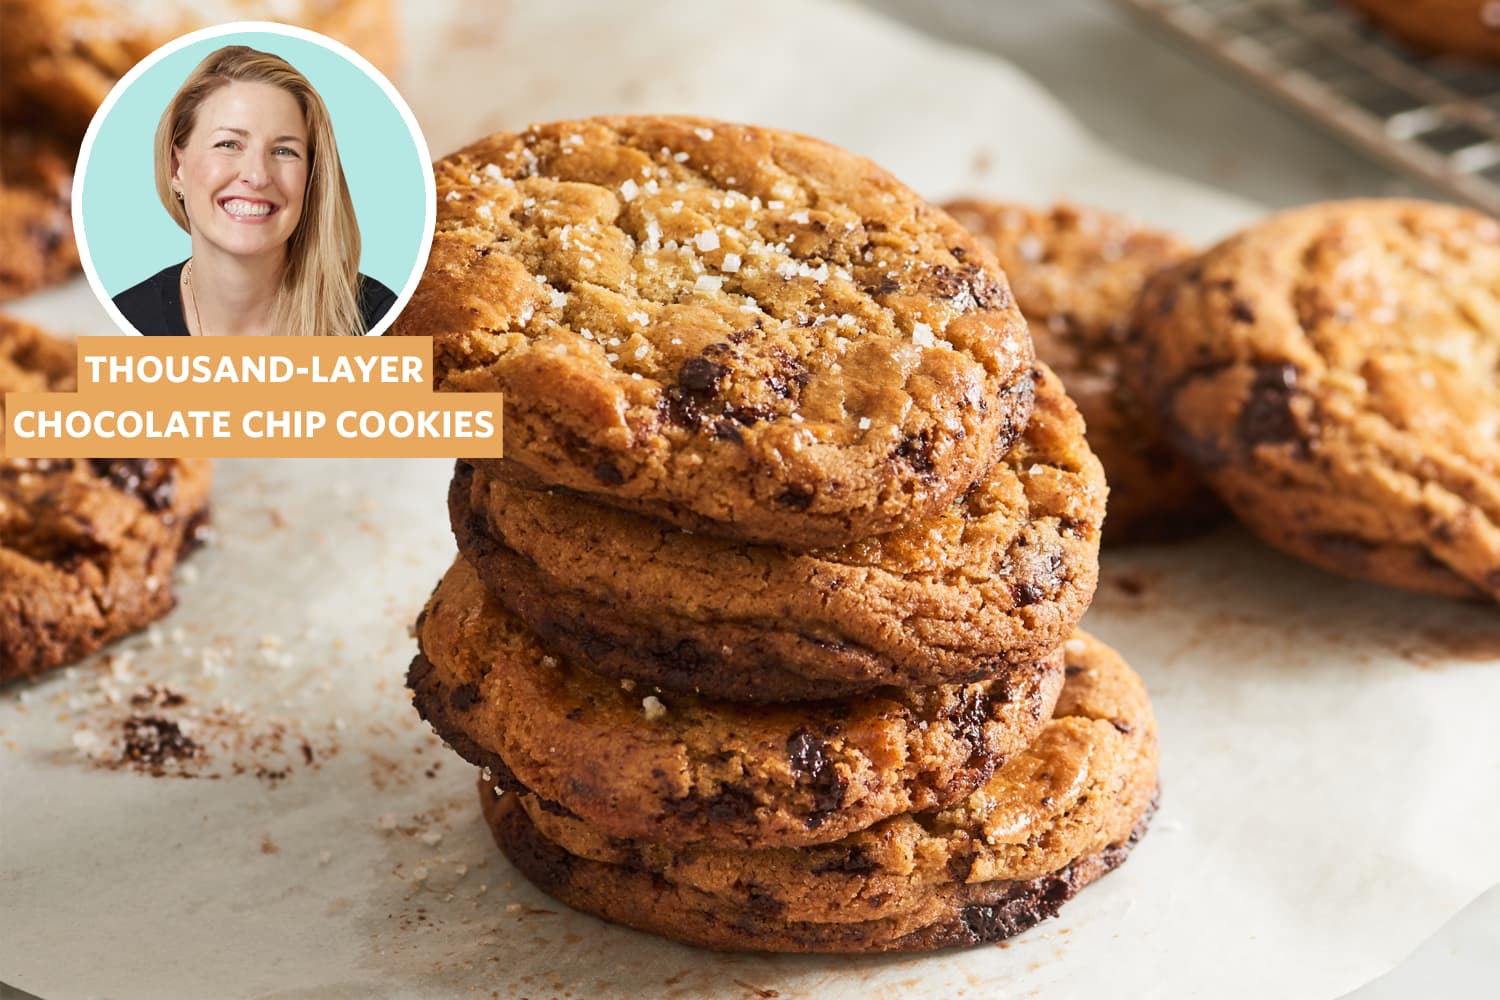 Here’s What to Know About Thousand-Layer Chocolate Chip Cookies